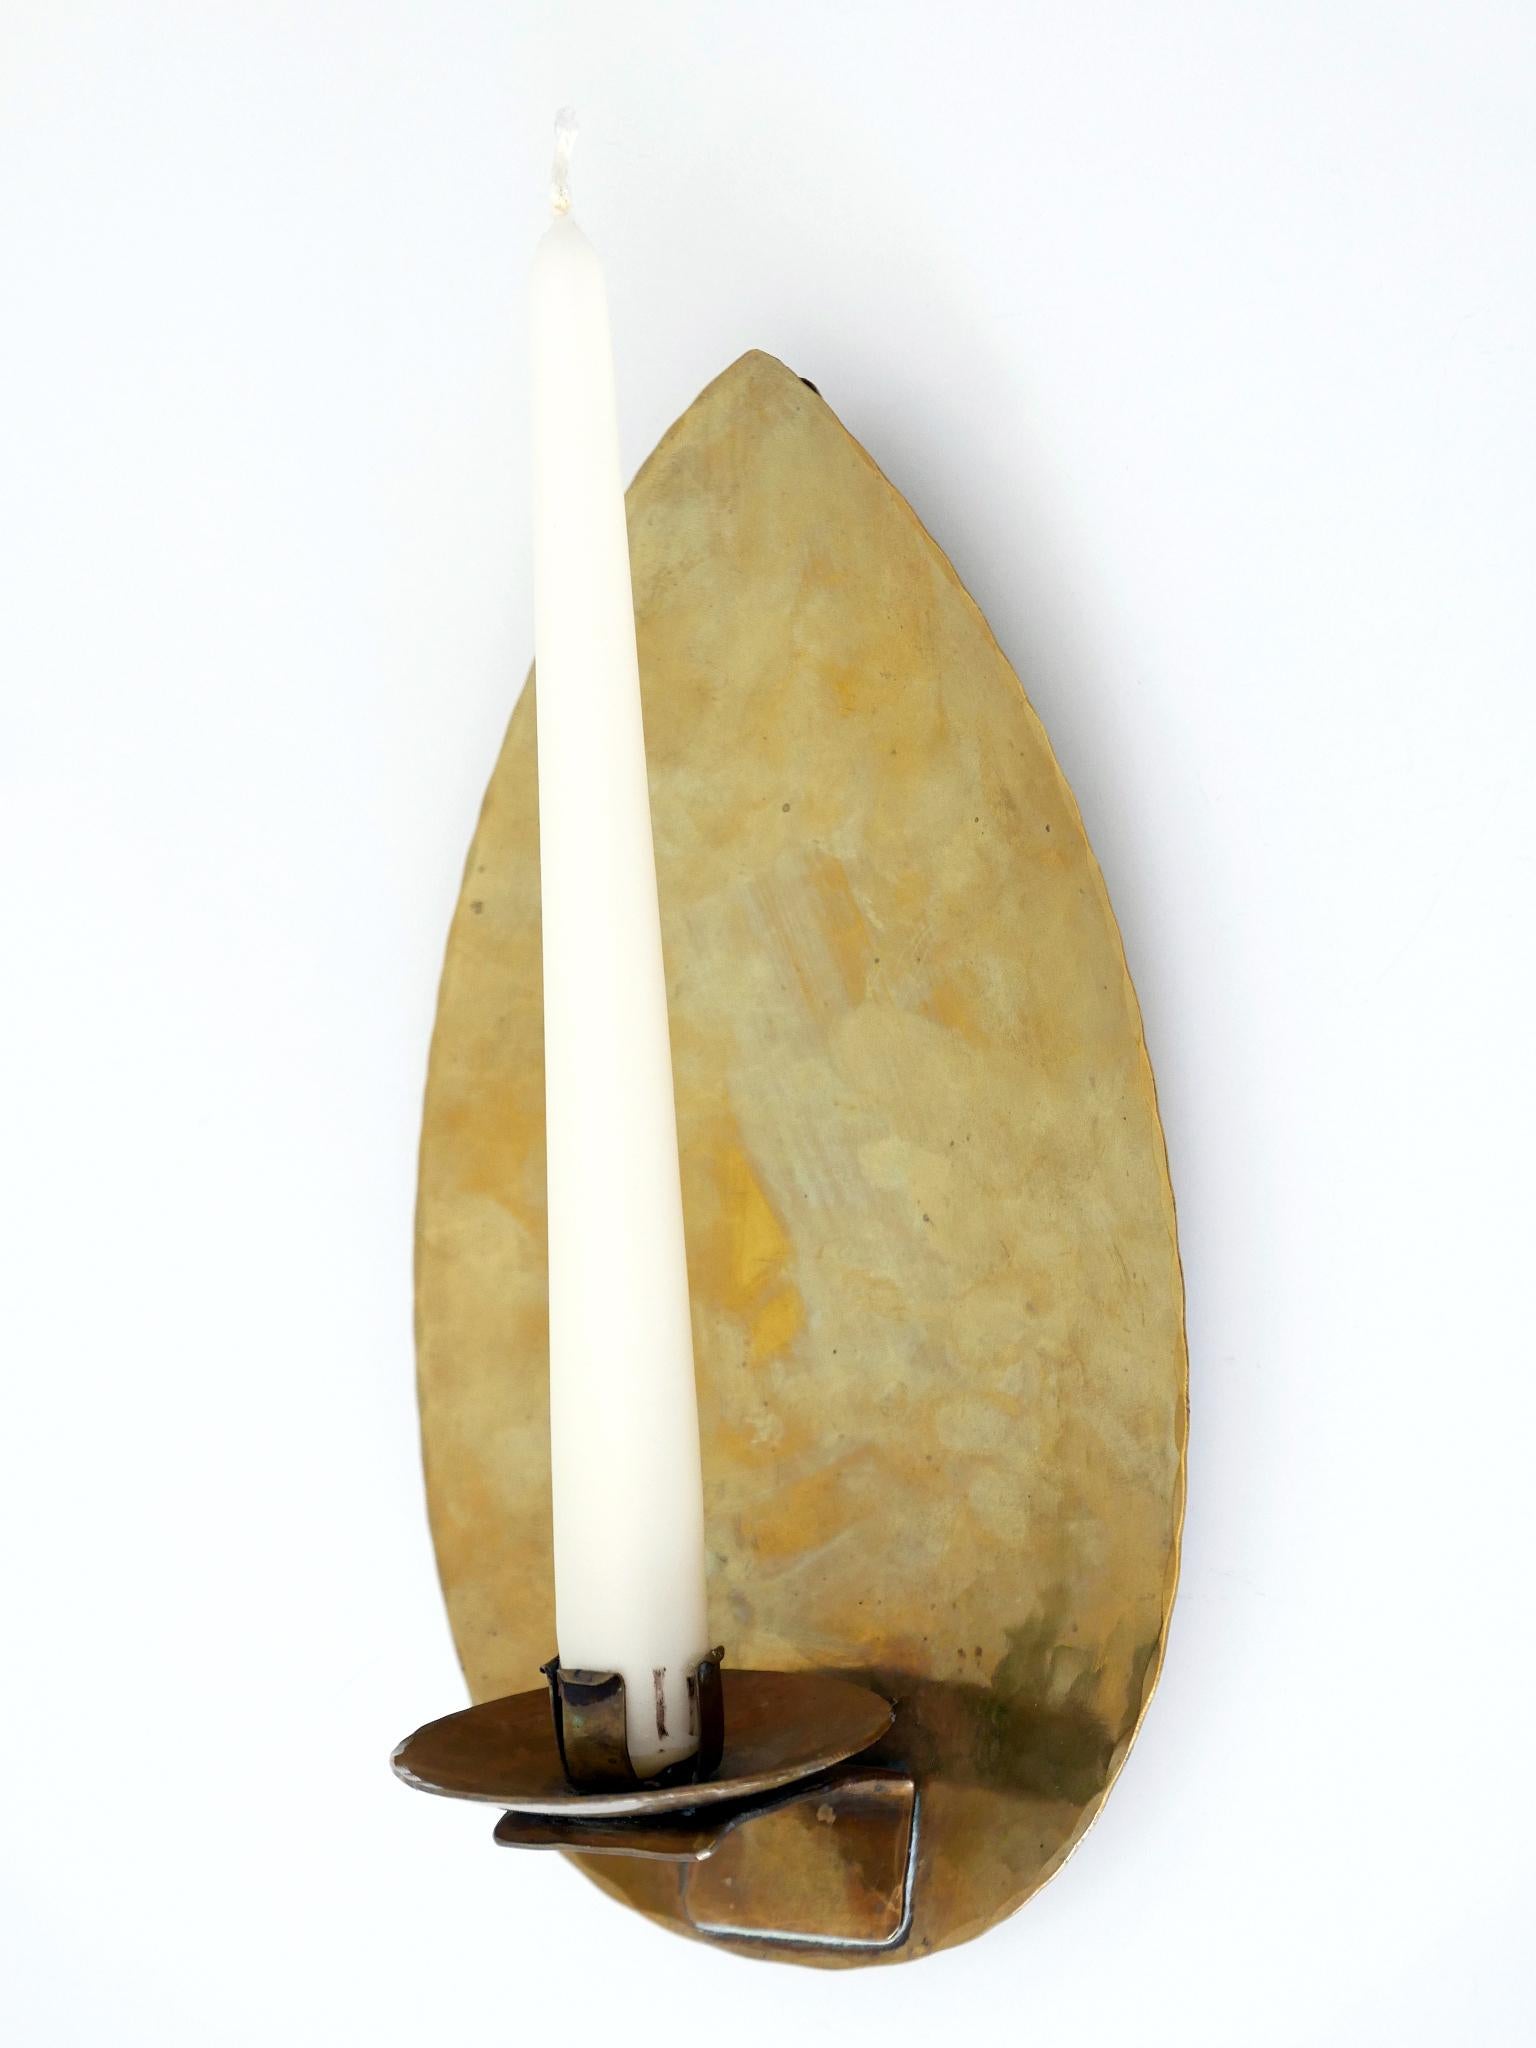 Elegant Hammered Brass Bauhaus Candle Sconce 1930s Germany For Sale 8